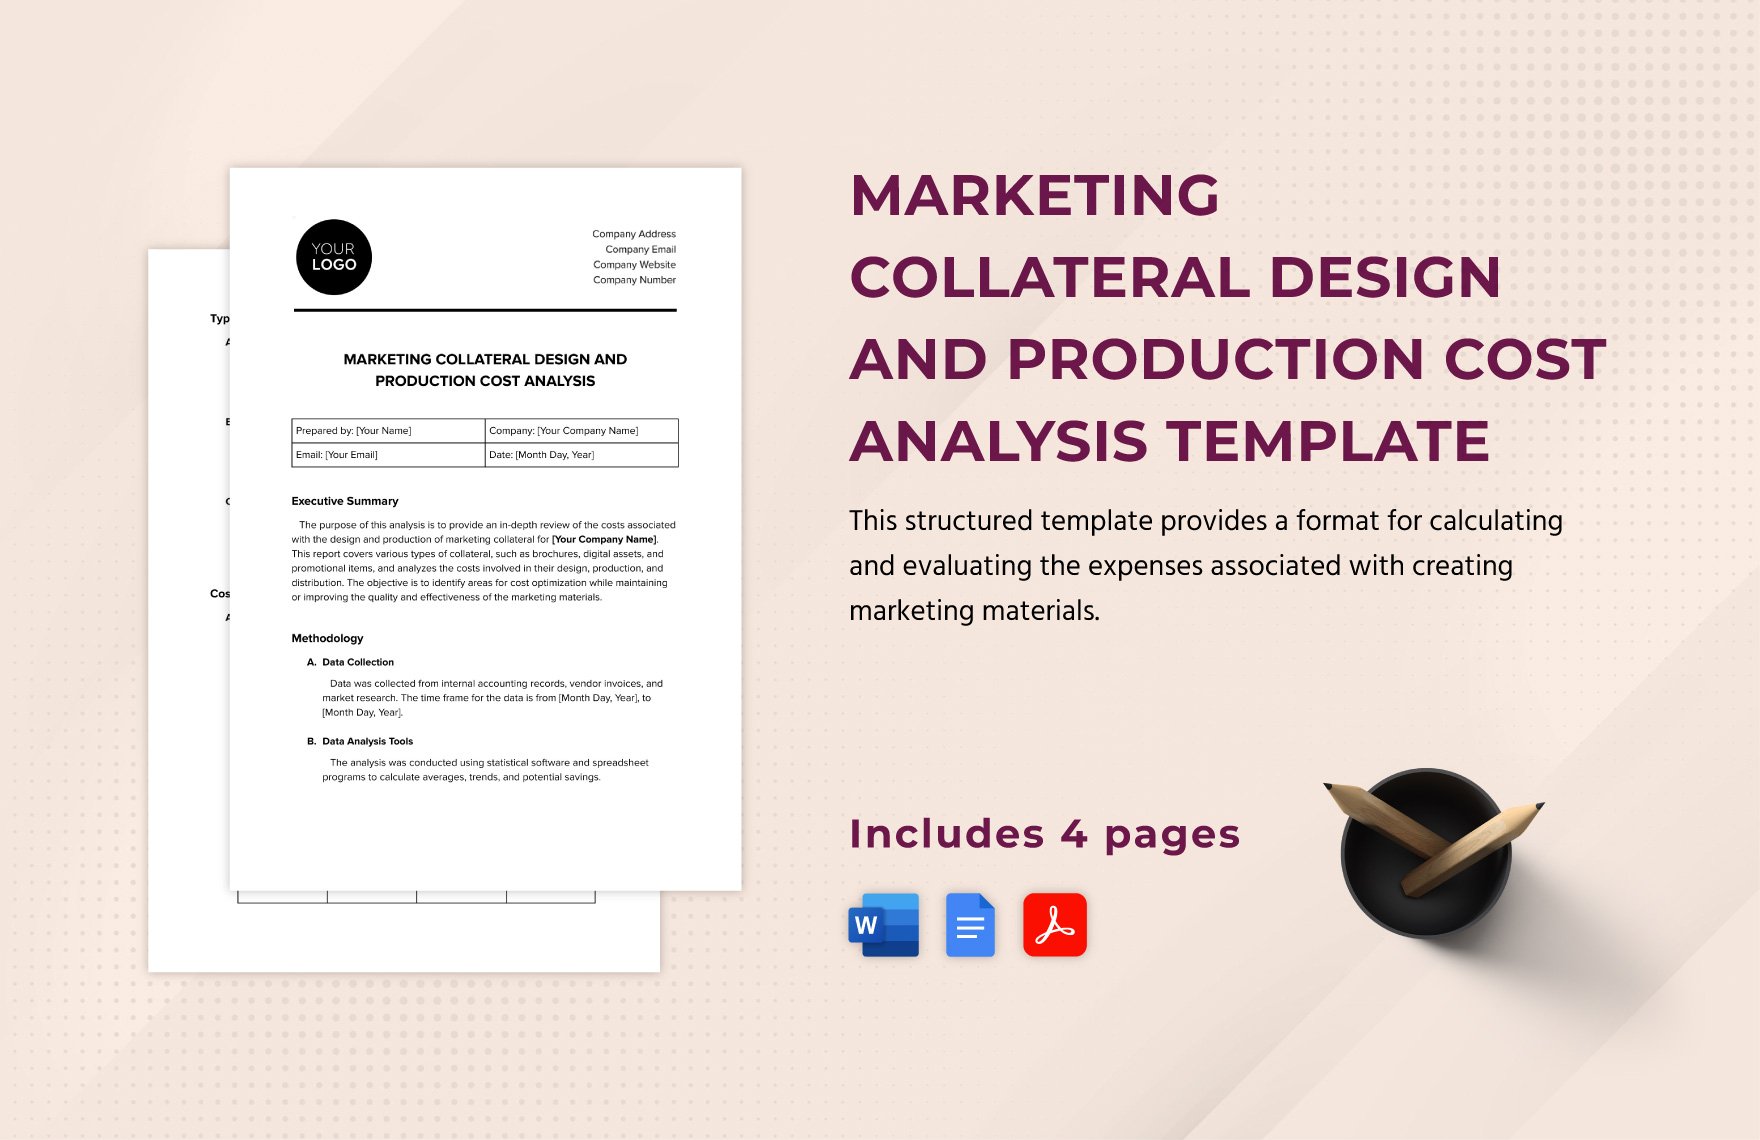 Marketing Collateral Design and Production Cost Analysis Template